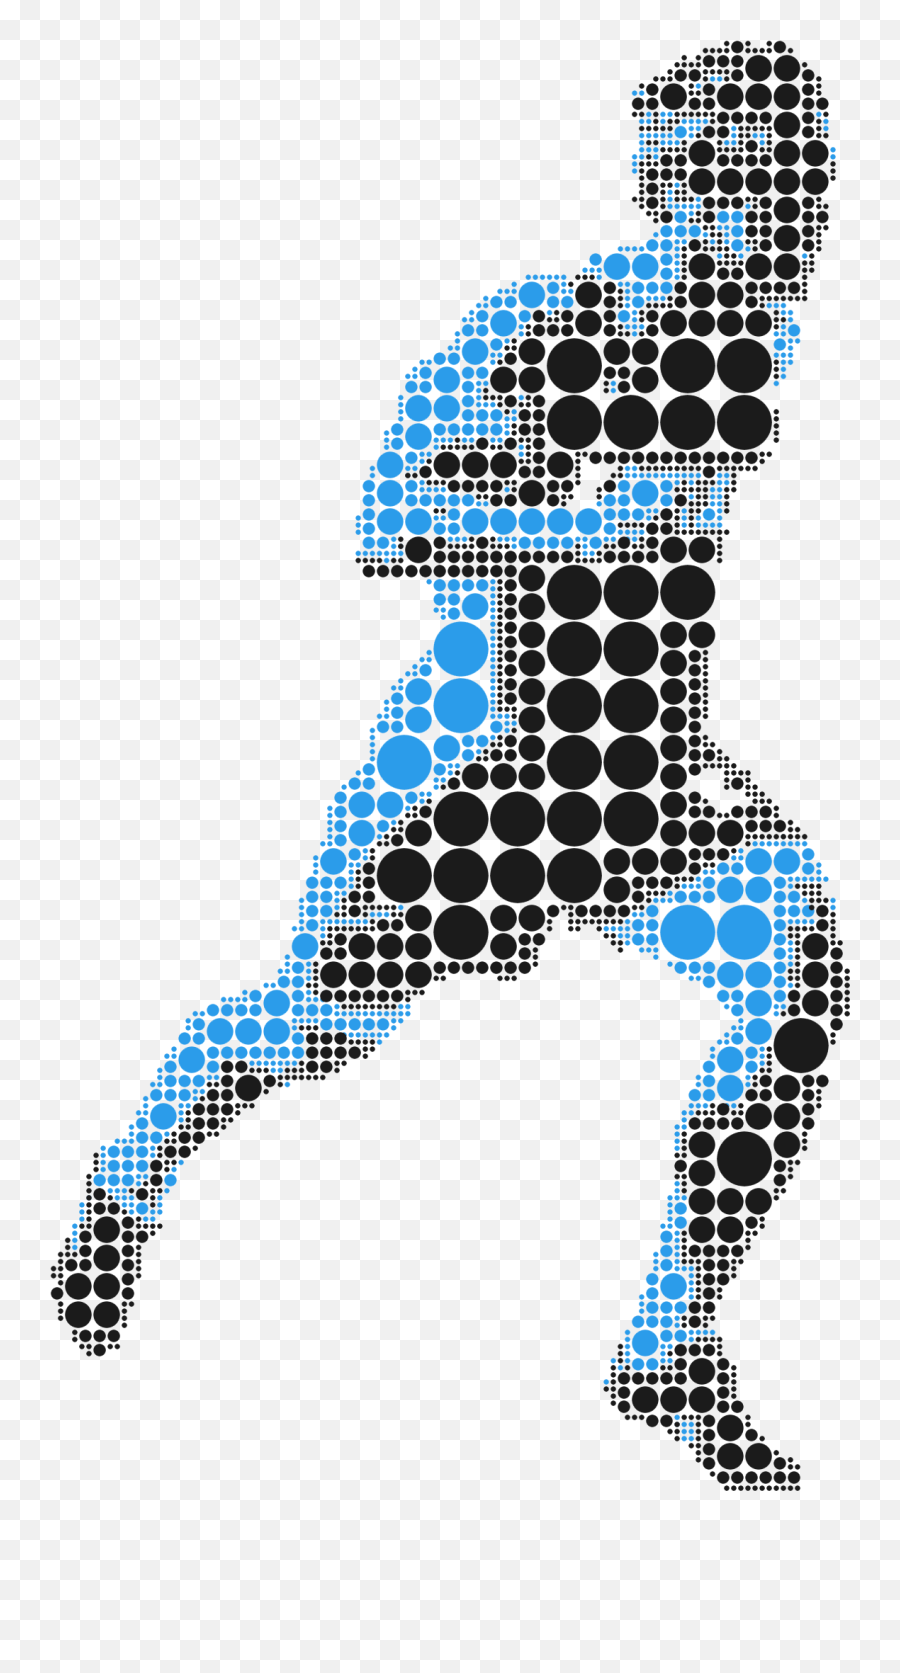 Black Blue And White Silhouette Of The Running Person With Emoji,Running Man Clipart